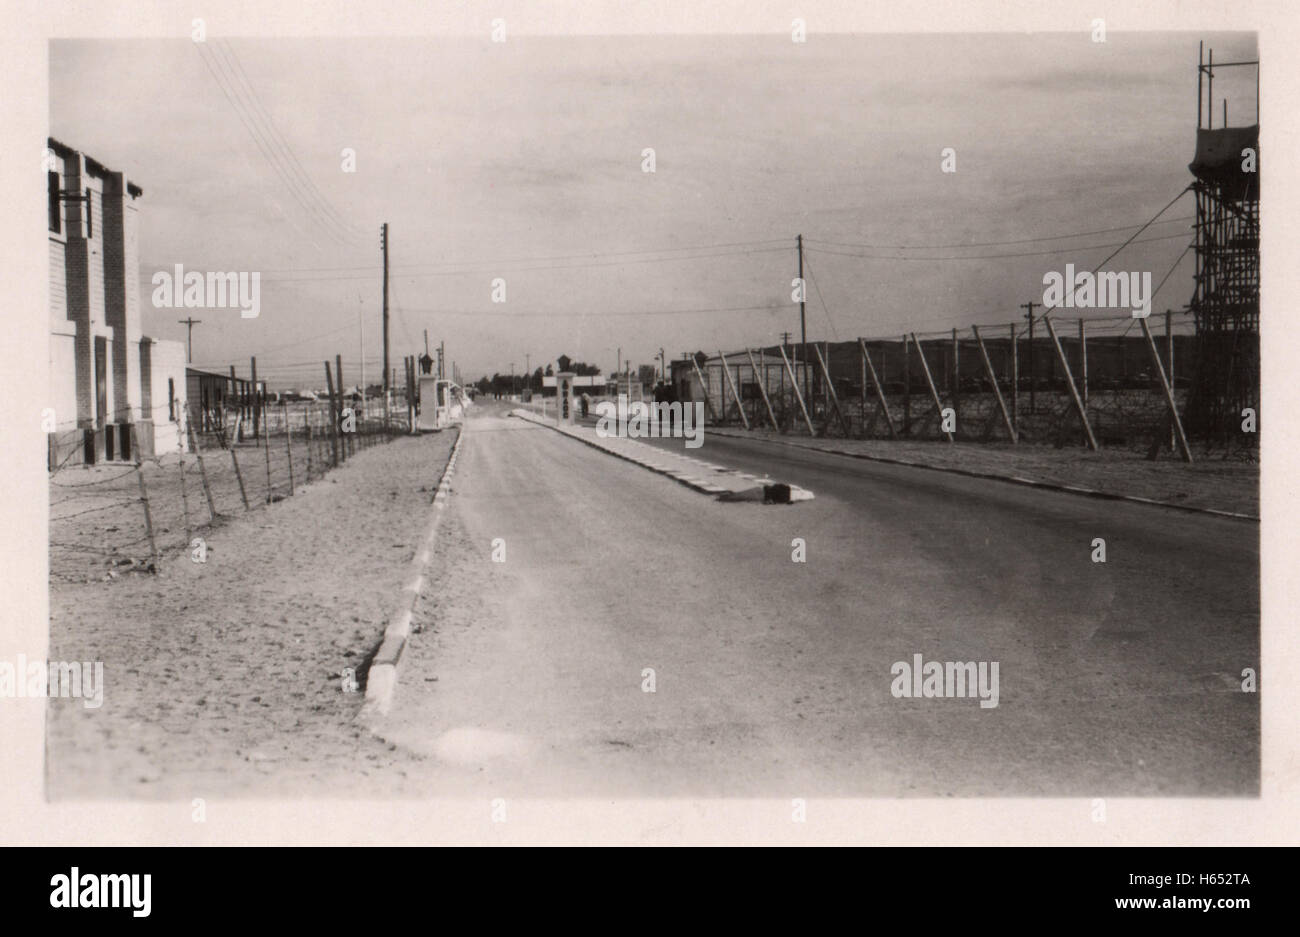 Entrance at a British army base in the period prior to withdrawal of British troops from the Suez Canal zone and the Suez Crisis. Location 10 Base Ordnance Depot Royal Army Ordnance Corps (RAOC) camp at Geneifa Ismailia area near the Suez Canal 1952. Stock Photo